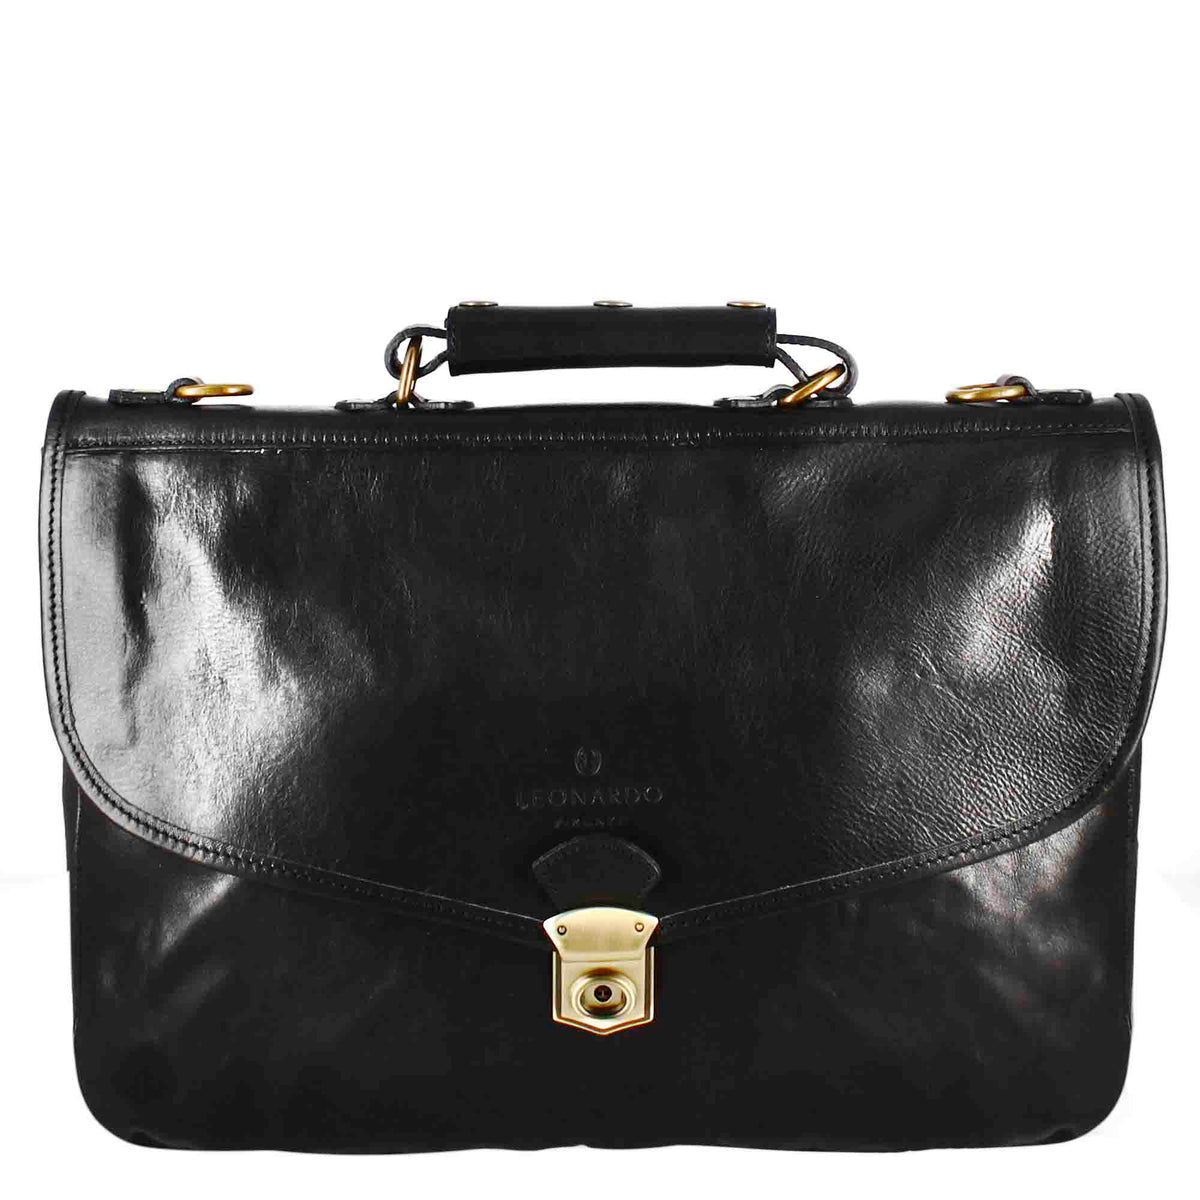 Full-grain leather professional briefcase with flap closure, black colour